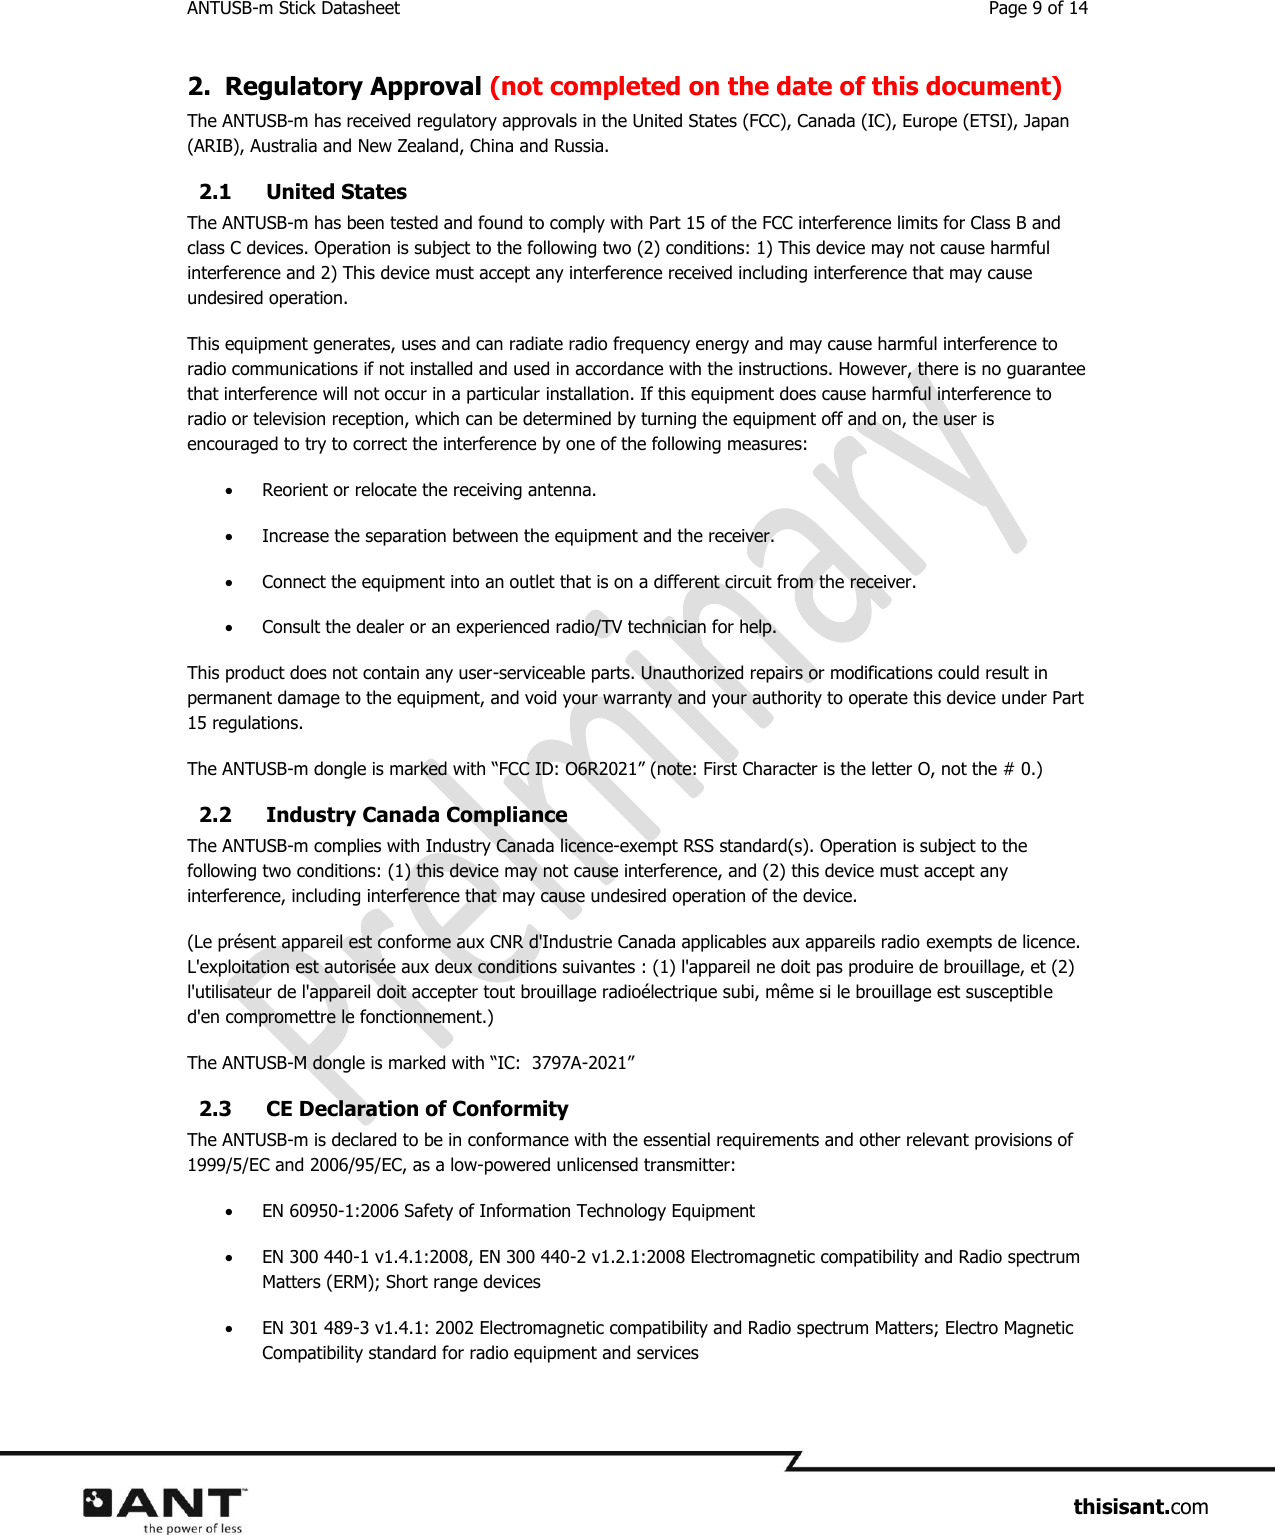 ANTUSB-m Stick Datasheet  Page 9 of 14                     thisisant.com 2. Regulatory Approval (not completed on the date of this document) The ANTUSB-m has received regulatory approvals in the United States (FCC), Canada (IC), Europe (ETSI), Japan (ARIB), Australia and New Zealand, China and Russia. 2.1 United States The ANTUSB-m has been tested and found to comply with Part 15 of the FCC interference limits for Class B and class C devices. Operation is subject to the following two (2) conditions: 1) This device may not cause harmful interference and 2) This device must accept any interference received including interference that may cause undesired operation. This equipment generates, uses and can radiate radio frequency energy and may cause harmful interference to radio communications if not installed and used in accordance with the instructions. However, there is no guarantee that interference will not occur in a particular installation. If this equipment does cause harmful interference to radio or television reception, which can be determined by turning the equipment off and on, the user is encouraged to try to correct the interference by one of the following measures:  Reorient or relocate the receiving antenna.  Increase the separation between the equipment and the receiver.  Connect the equipment into an outlet that is on a different circuit from the receiver.  Consult the dealer or an experienced radio/TV technician for help. This product does not contain any user-serviceable parts. Unauthorized repairs or modifications could result in permanent damage to the equipment, and void your warranty and your authority to operate this device under Part 15 regulations. The ANTUSB-m dongle is marked with “FCC ID: O6R2021” (note: First Character is the letter O, not the # 0.)  2.2 Industry Canada Compliance The ANTUSB-m complies with Industry Canada licence-exempt RSS standard(s). Operation is subject to the following two conditions: (1) this device may not cause interference, and (2) this device must accept any interference, including interference that may cause undesired operation of the device. (Le présent appareil est conforme aux CNR d&apos;Industrie Canada applicables aux appareils radio exempts de licence.  L&apos;exploitation est autorisée aux deux conditions suivantes : (1) l&apos;appareil ne doit pas produire de brouillage, et (2) l&apos;utilisateur de l&apos;appareil doit accepter tout brouillage radioélectrique subi, même si le brouillage est susceptible d&apos;en compromettre le fonctionnement.) The ANTUSB-M dongle is marked with “IC:  3797A-2021”  2.3 CE Declaration of Conformity The ANTUSB-m is declared to be in conformance with the essential requirements and other relevant provisions of 1999/5/EC and 2006/95/EC, as a low-powered unlicensed transmitter:  EN 60950-1:2006 Safety of Information Technology Equipment  EN 300 440-1 v1.4.1:2008, EN 300 440-2 v1.2.1:2008 Electromagnetic compatibility and Radio spectrum Matters (ERM); Short range devices  EN 301 489-3 v1.4.1: 2002 Electromagnetic compatibility and Radio spectrum Matters; Electro Magnetic Compatibility standard for radio equipment and services 